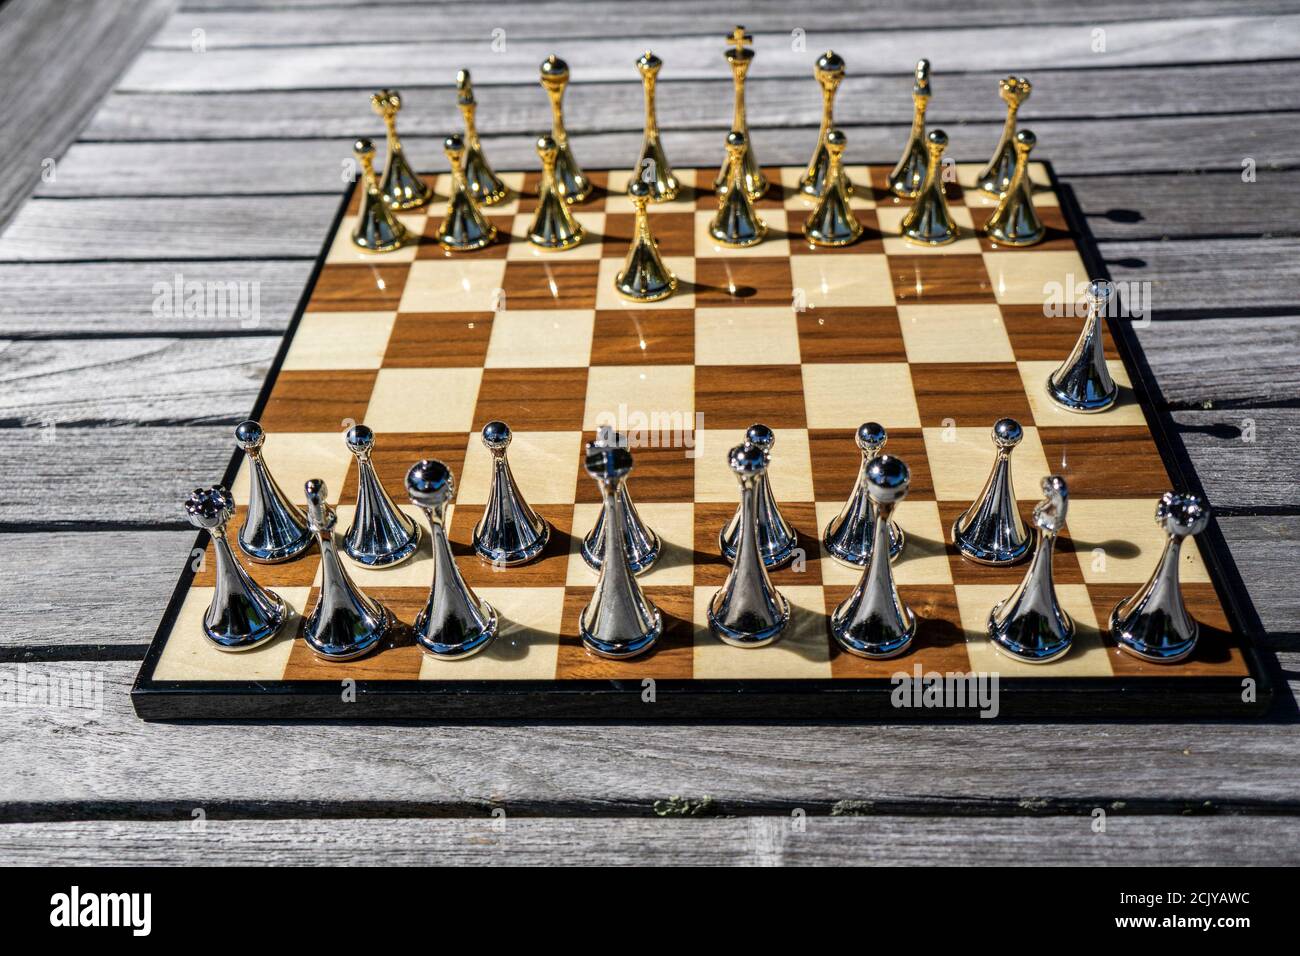 Giant Chess Set in the Grounds of Cathedral Peak Hotel Drakensberg  Mountains South Africa Stock Photo - Alamy